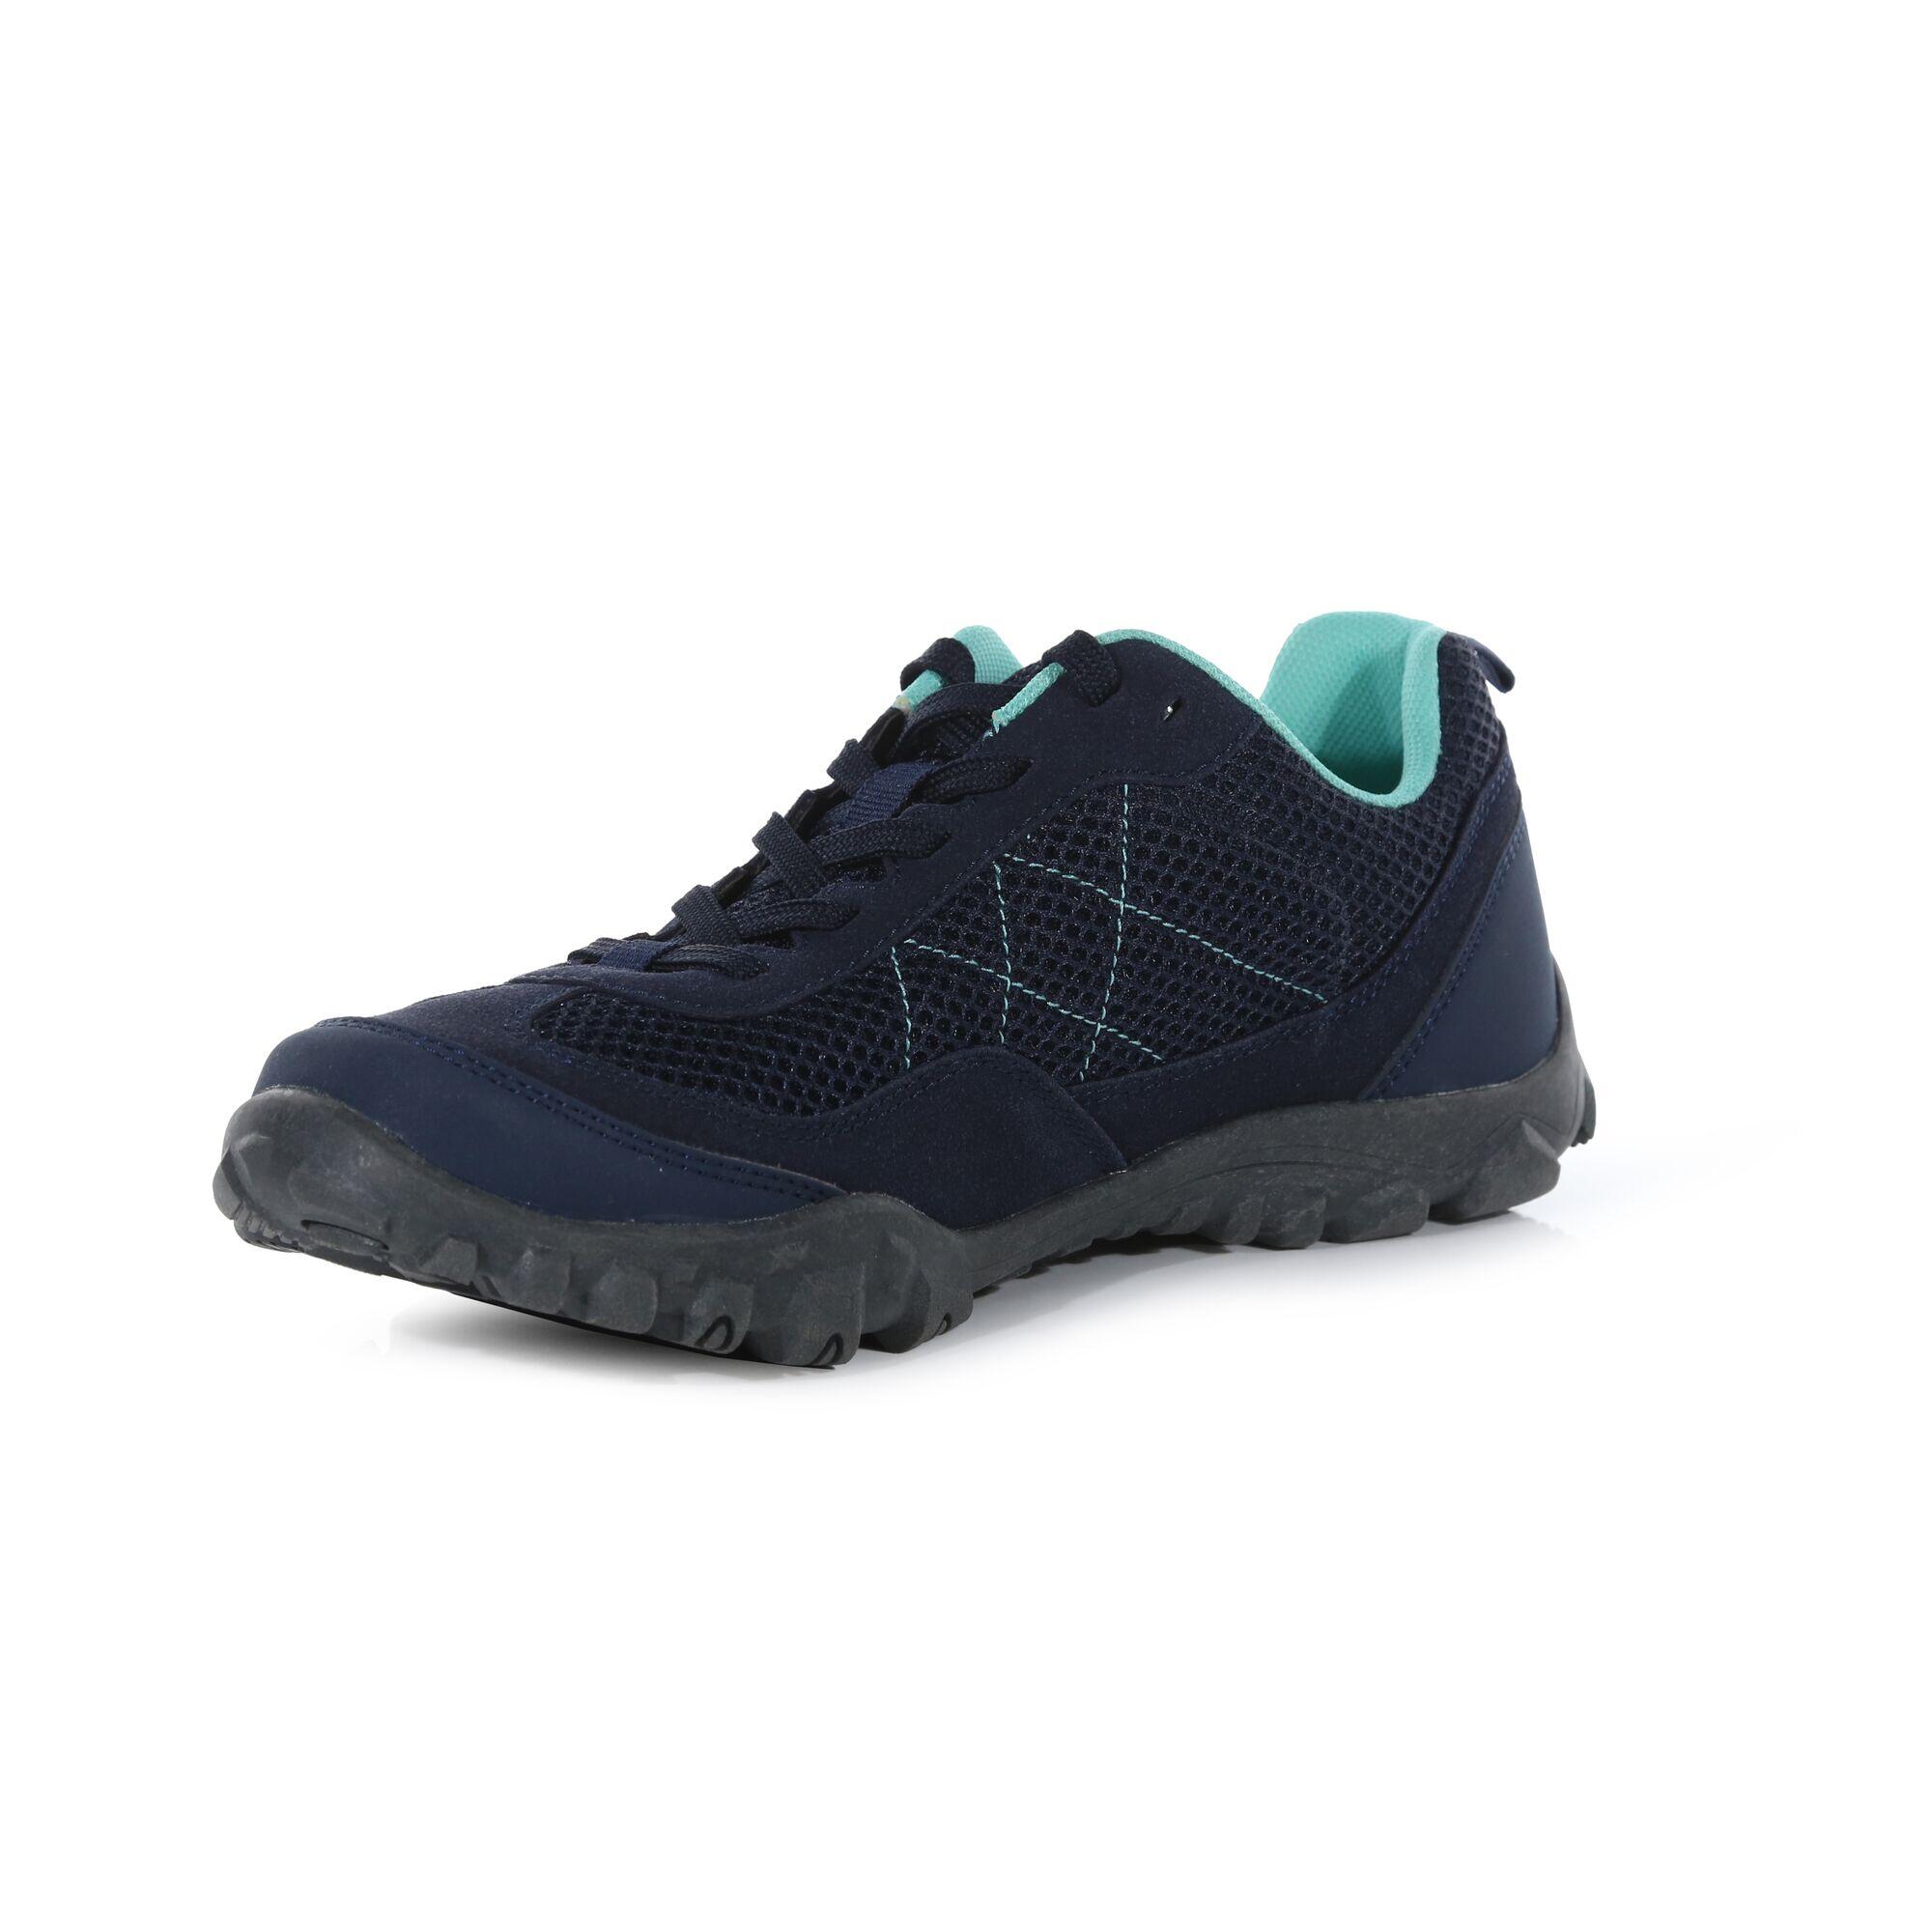 Lady Edgepoint Life Women's Walking Trainers - Ocean Navy 4/6